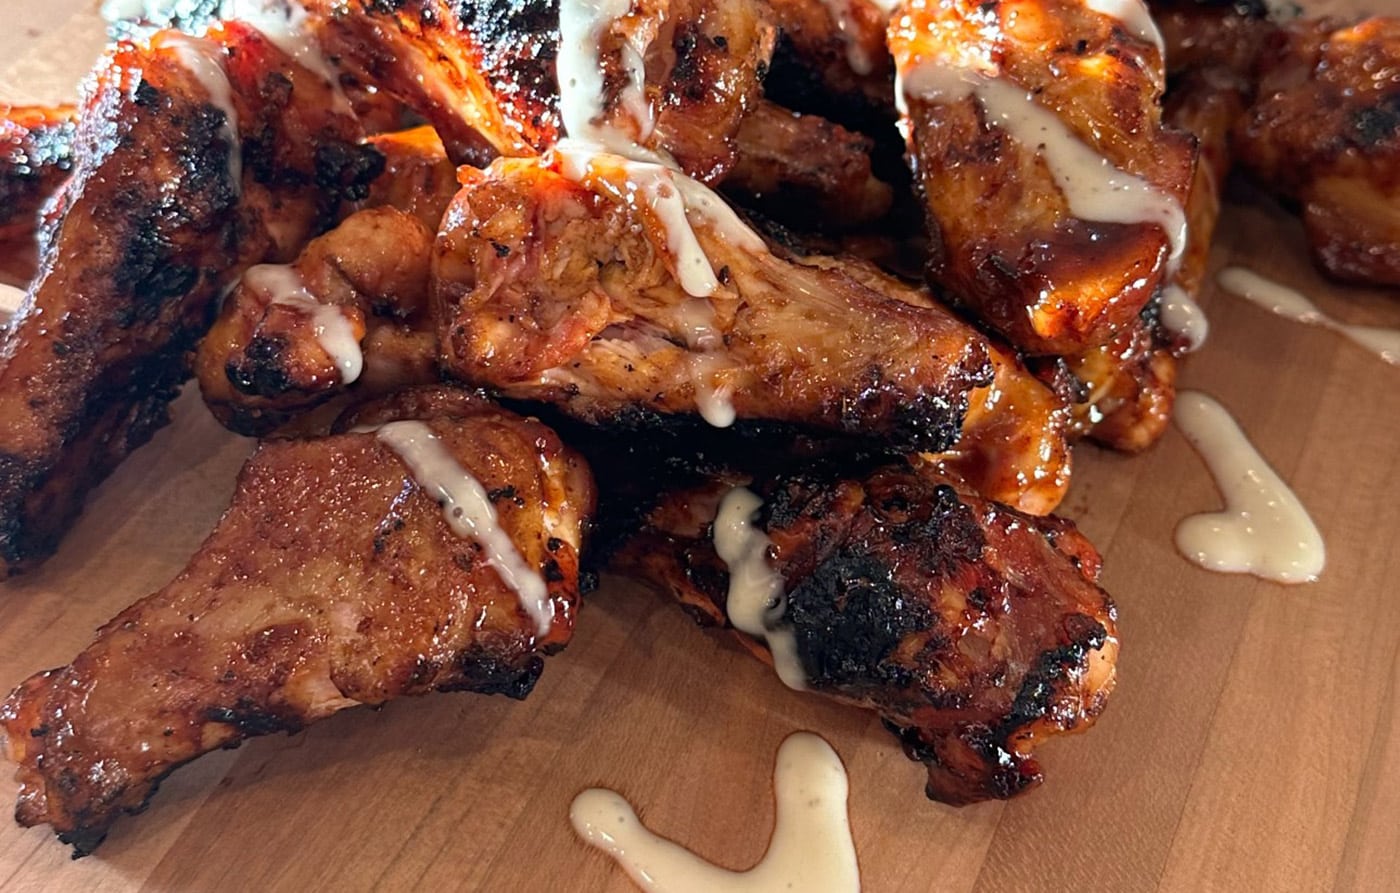 Finished serving of Meat Mitch Chicken Wings from the smoker, made with 3 of his best-selling sauces.